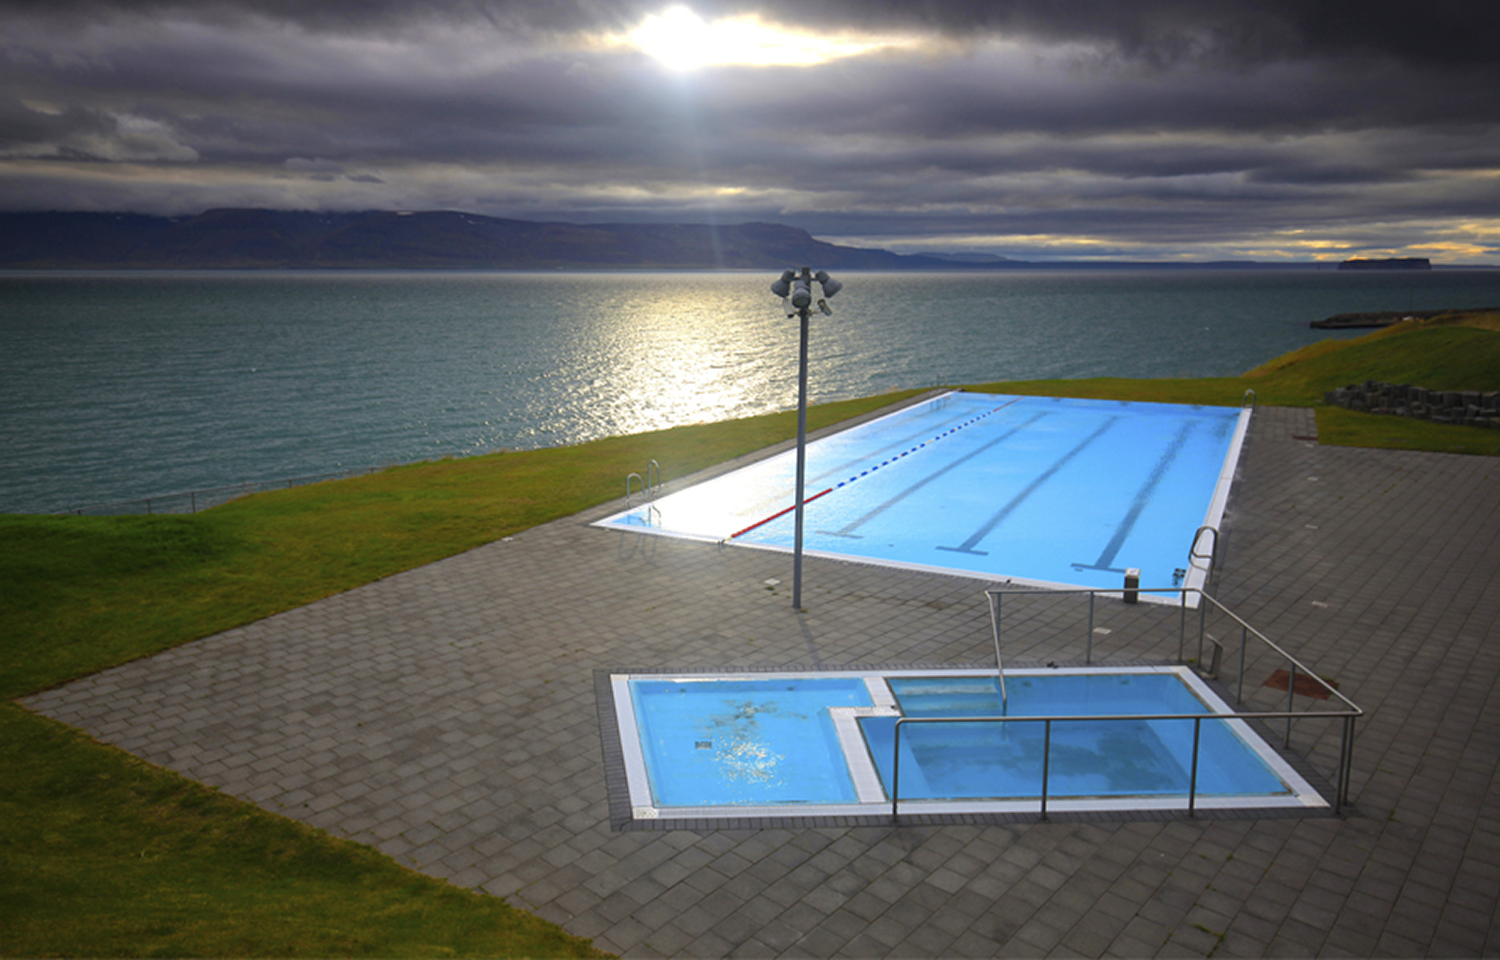 Swimming pool in Iceland